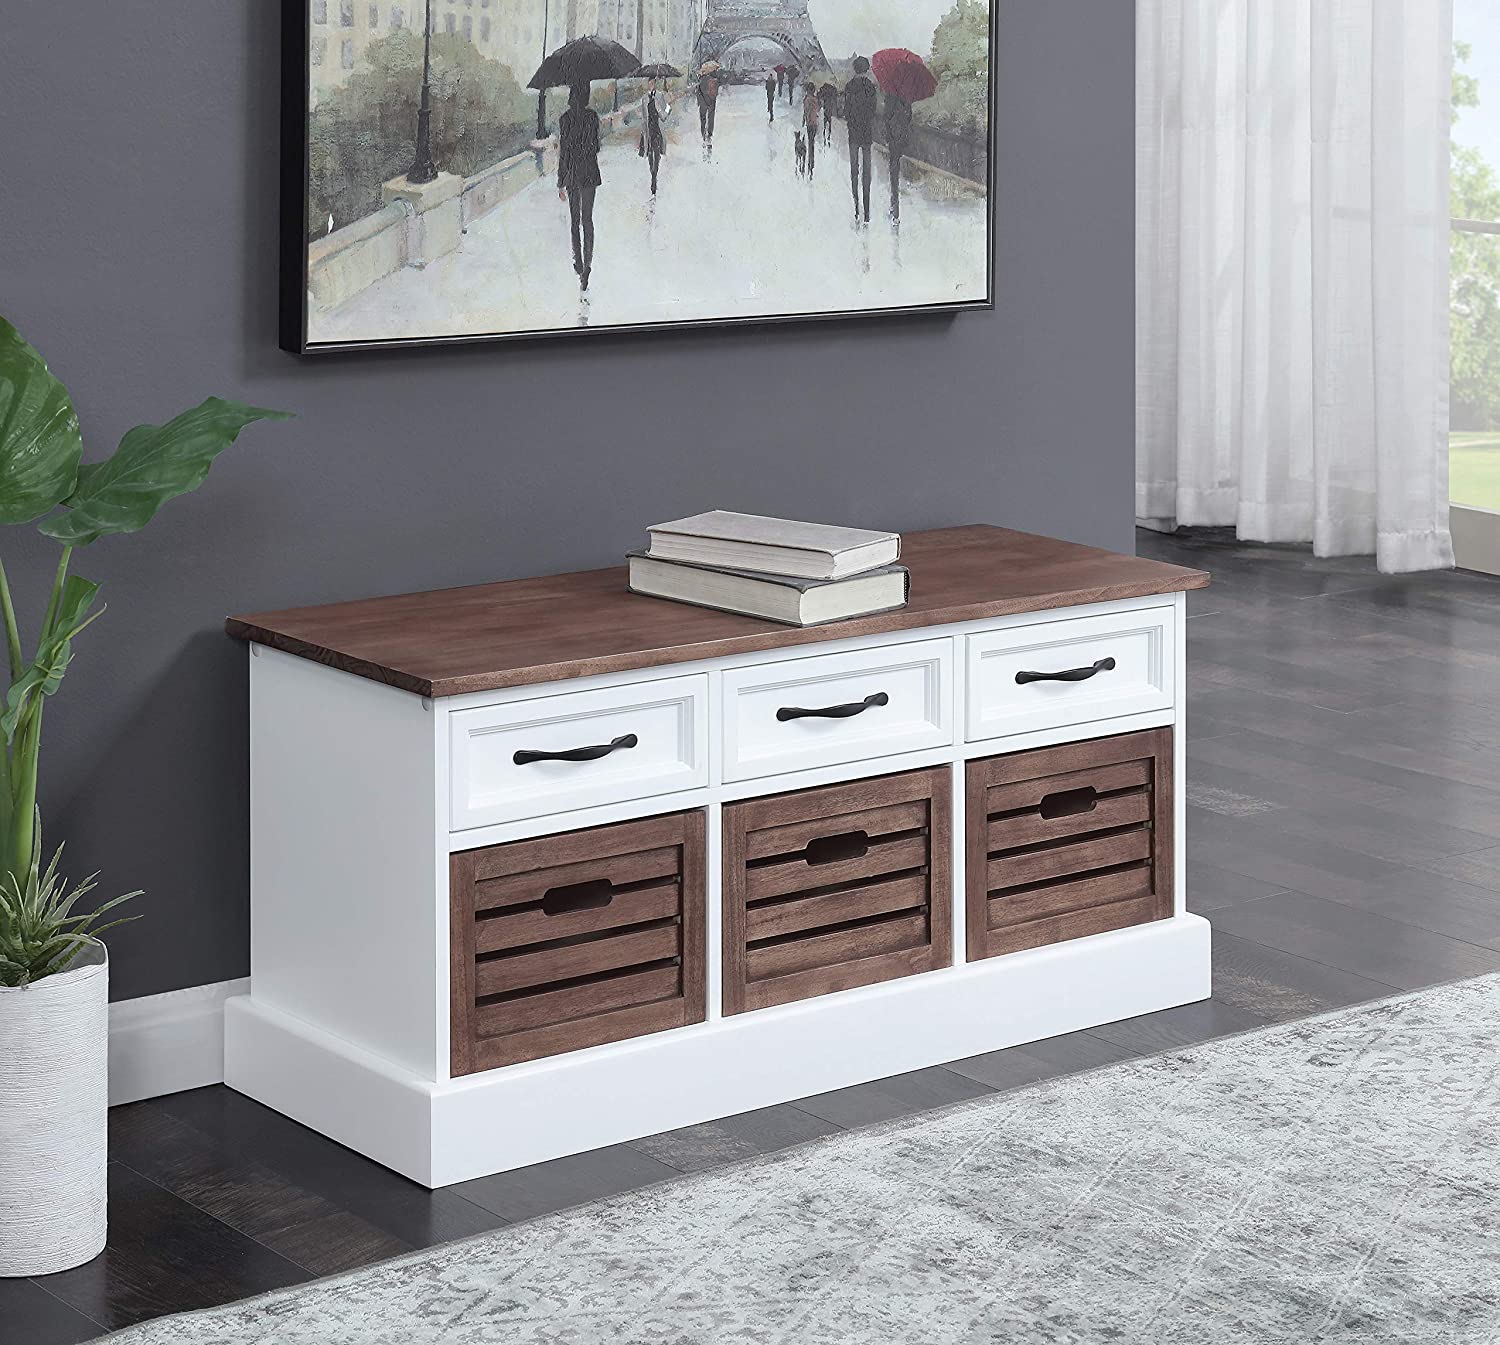 Alma 3-Drawer Storage Bench Weathered Brown And White